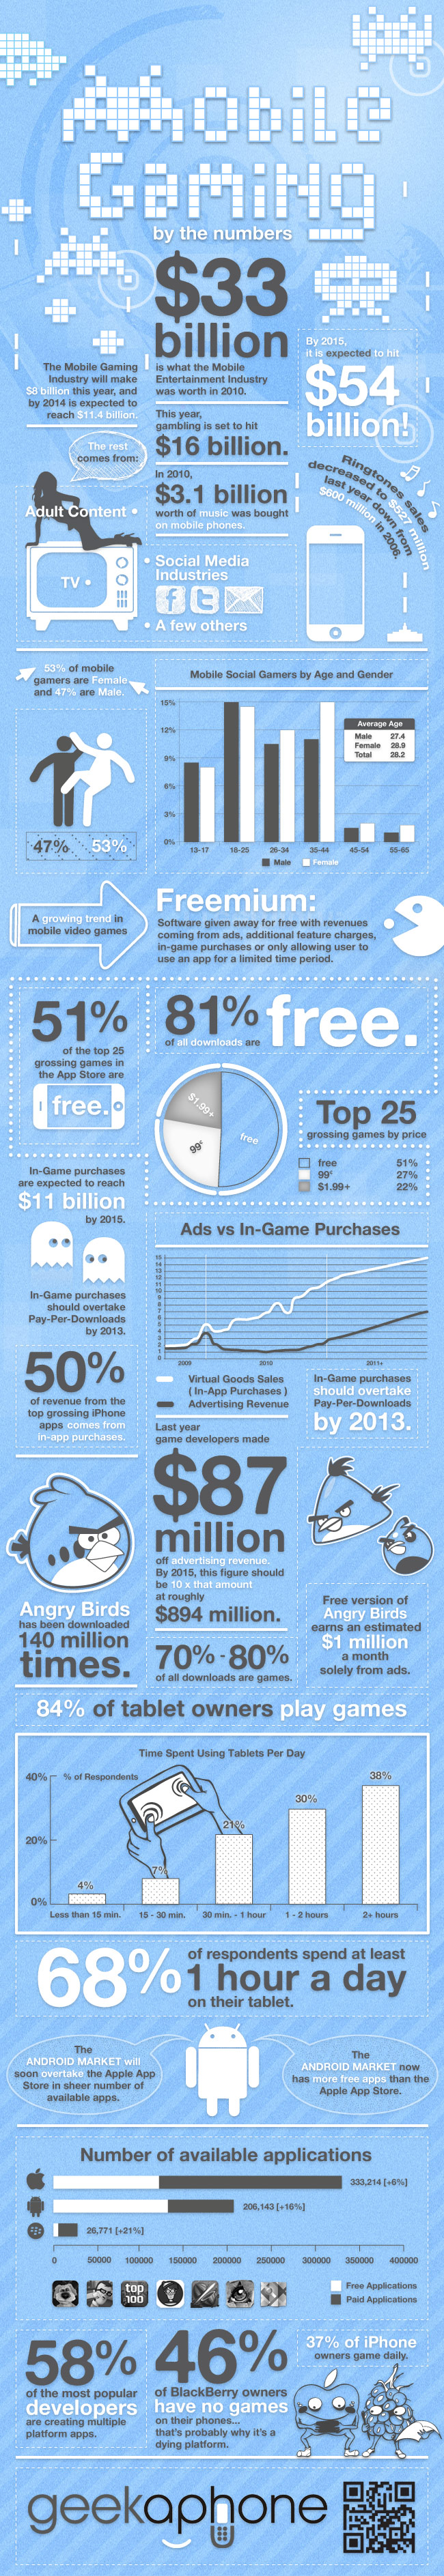 mobile games infographic